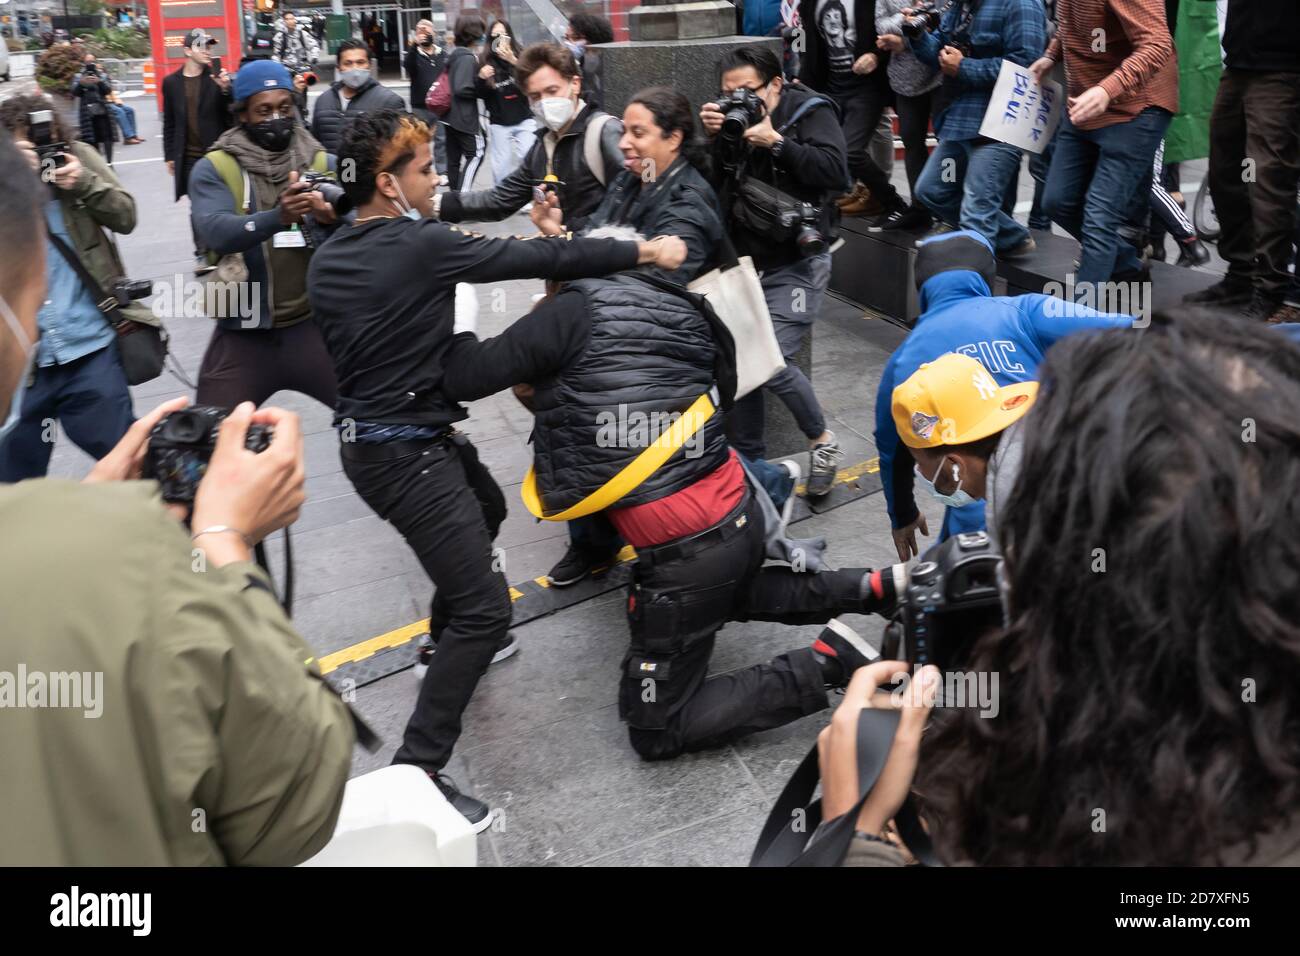 NEW YORK, NY – OCTOBER 25: Anti-Trump and Pro-Trump protesters fight in Times Square on October 25, 2020 in New York City. Stock Photo